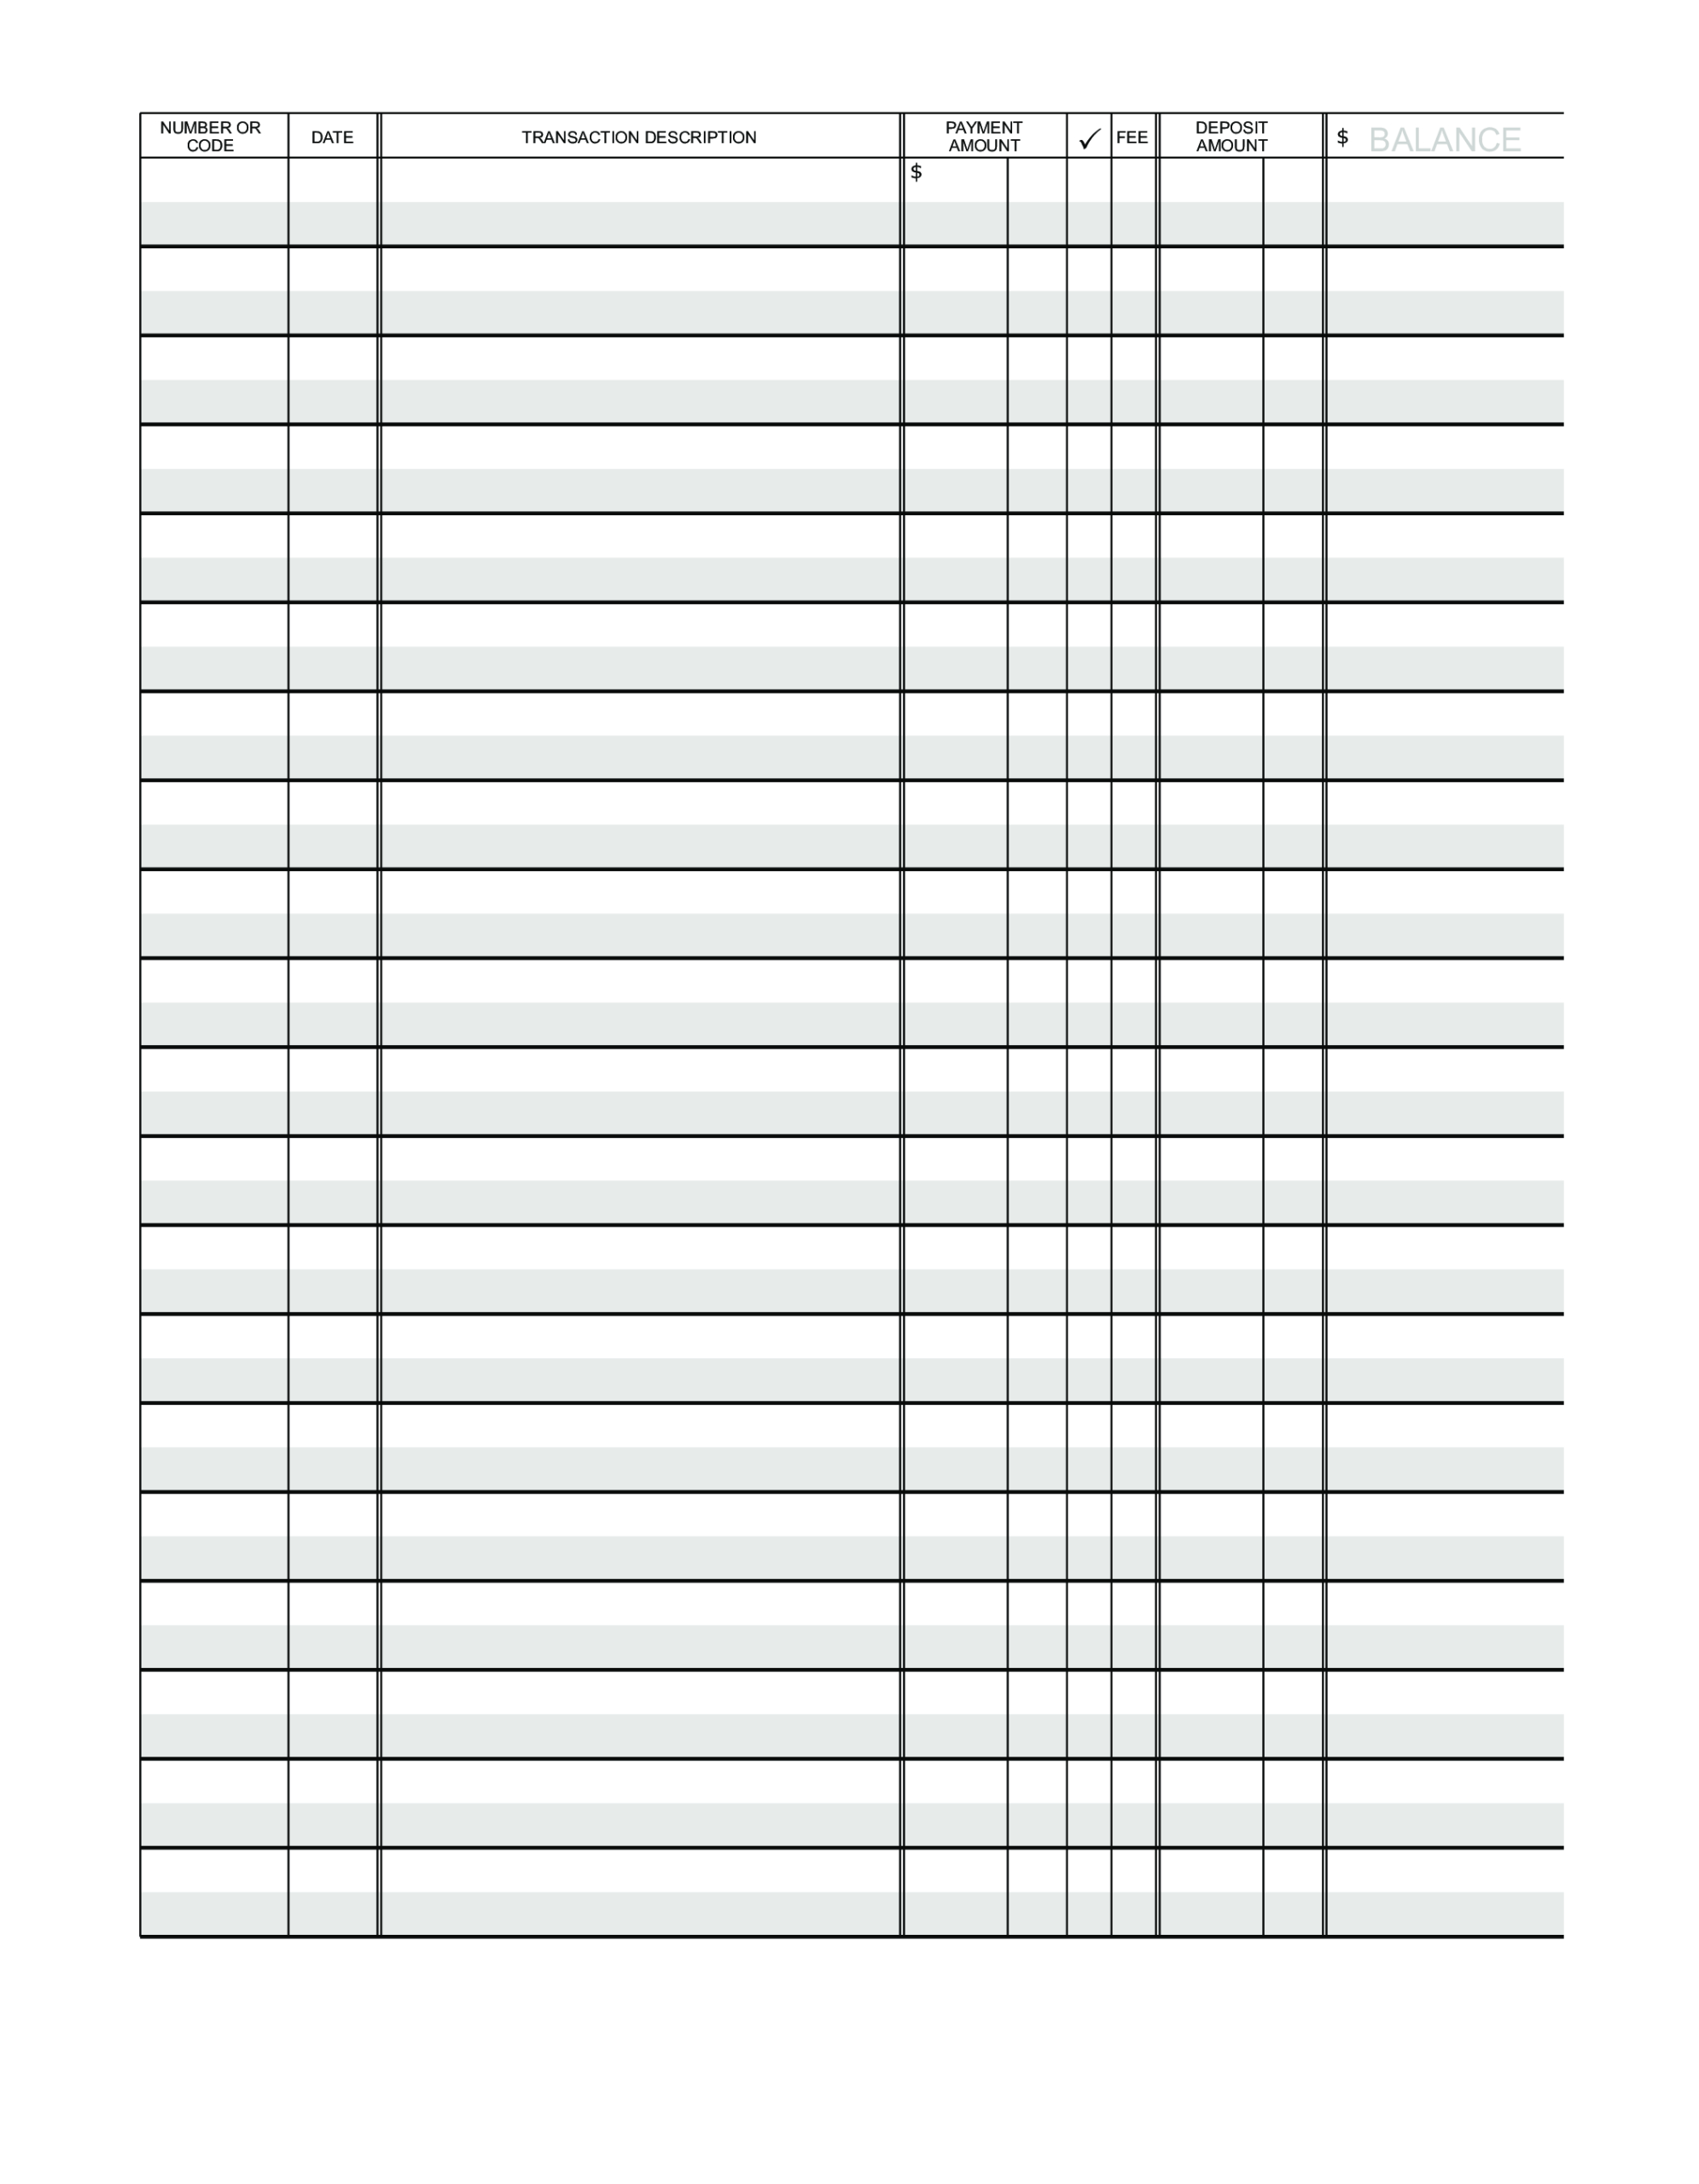 Blank Ledger Paper | Templates At Allbusinesstemplates For Blank Ledger Template